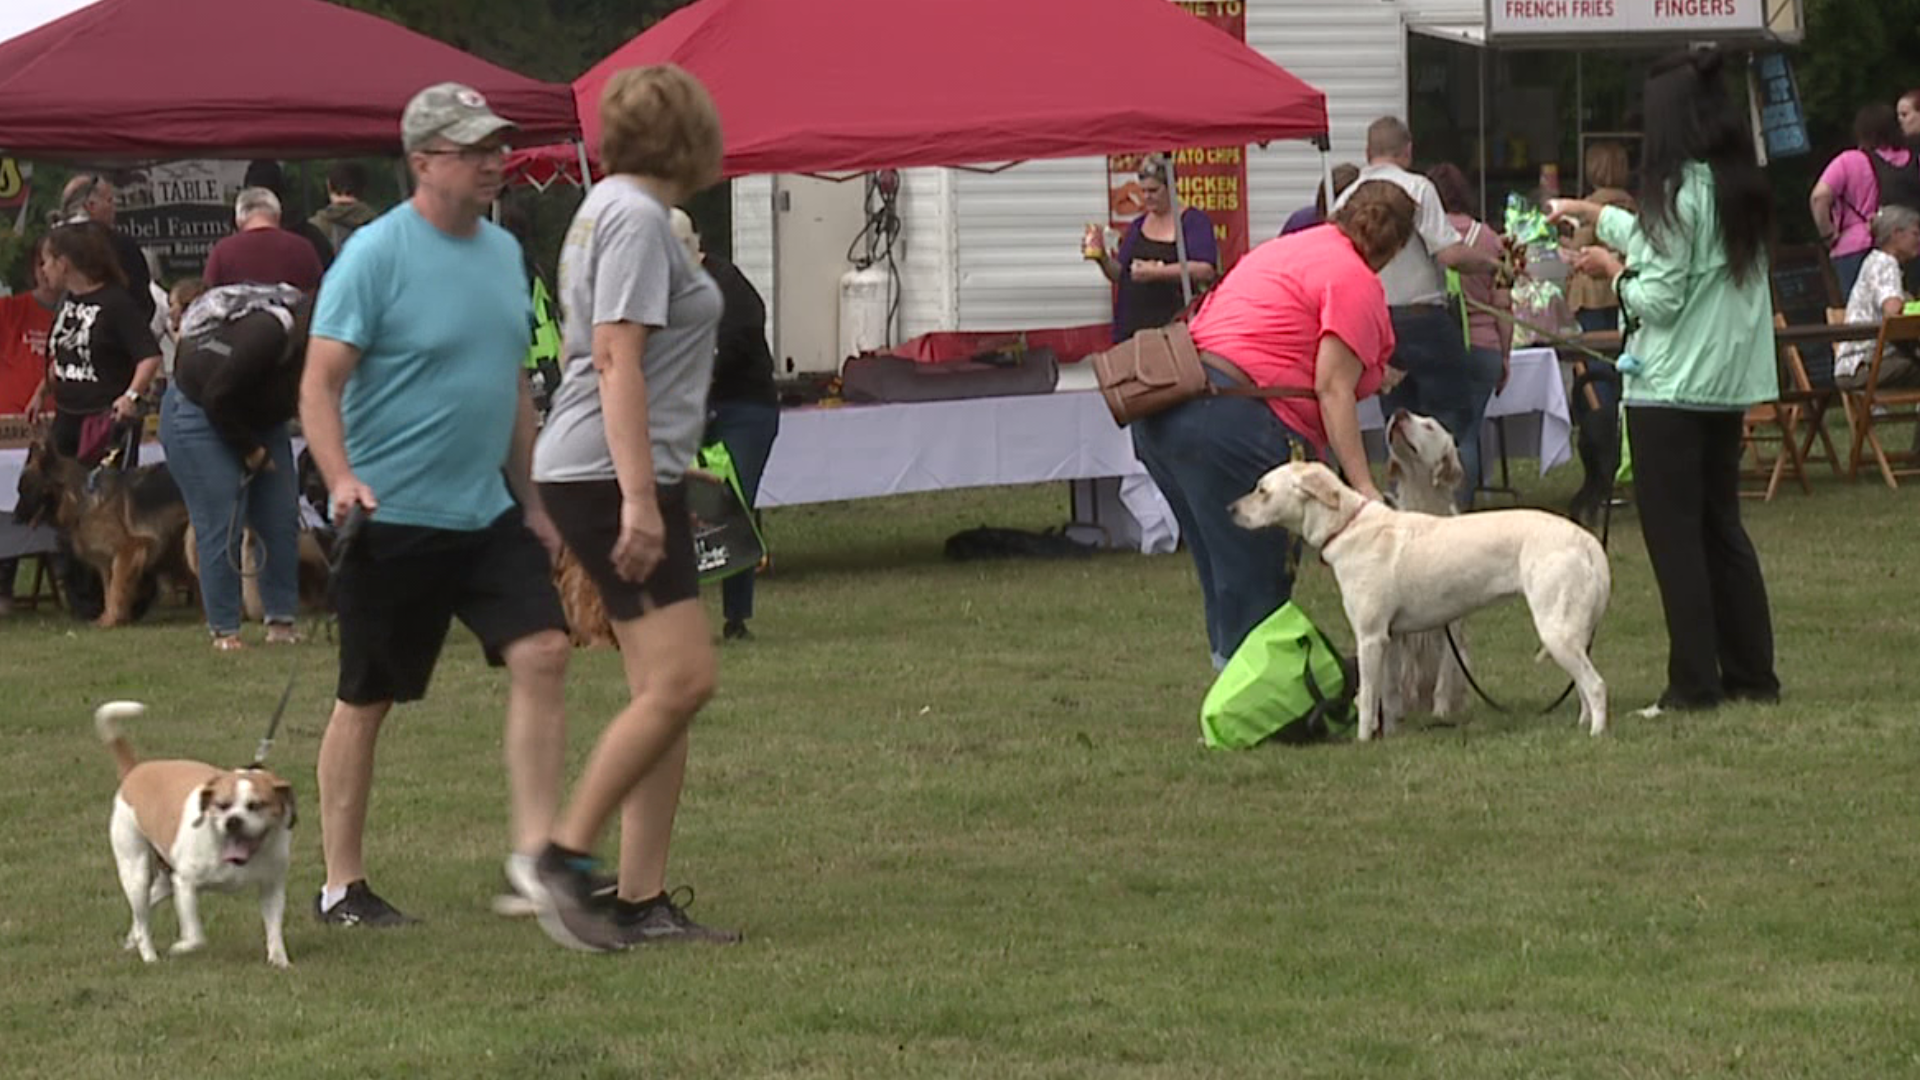 The dog-friendly event included pet-themed vendors, free photos, and free treat bags.